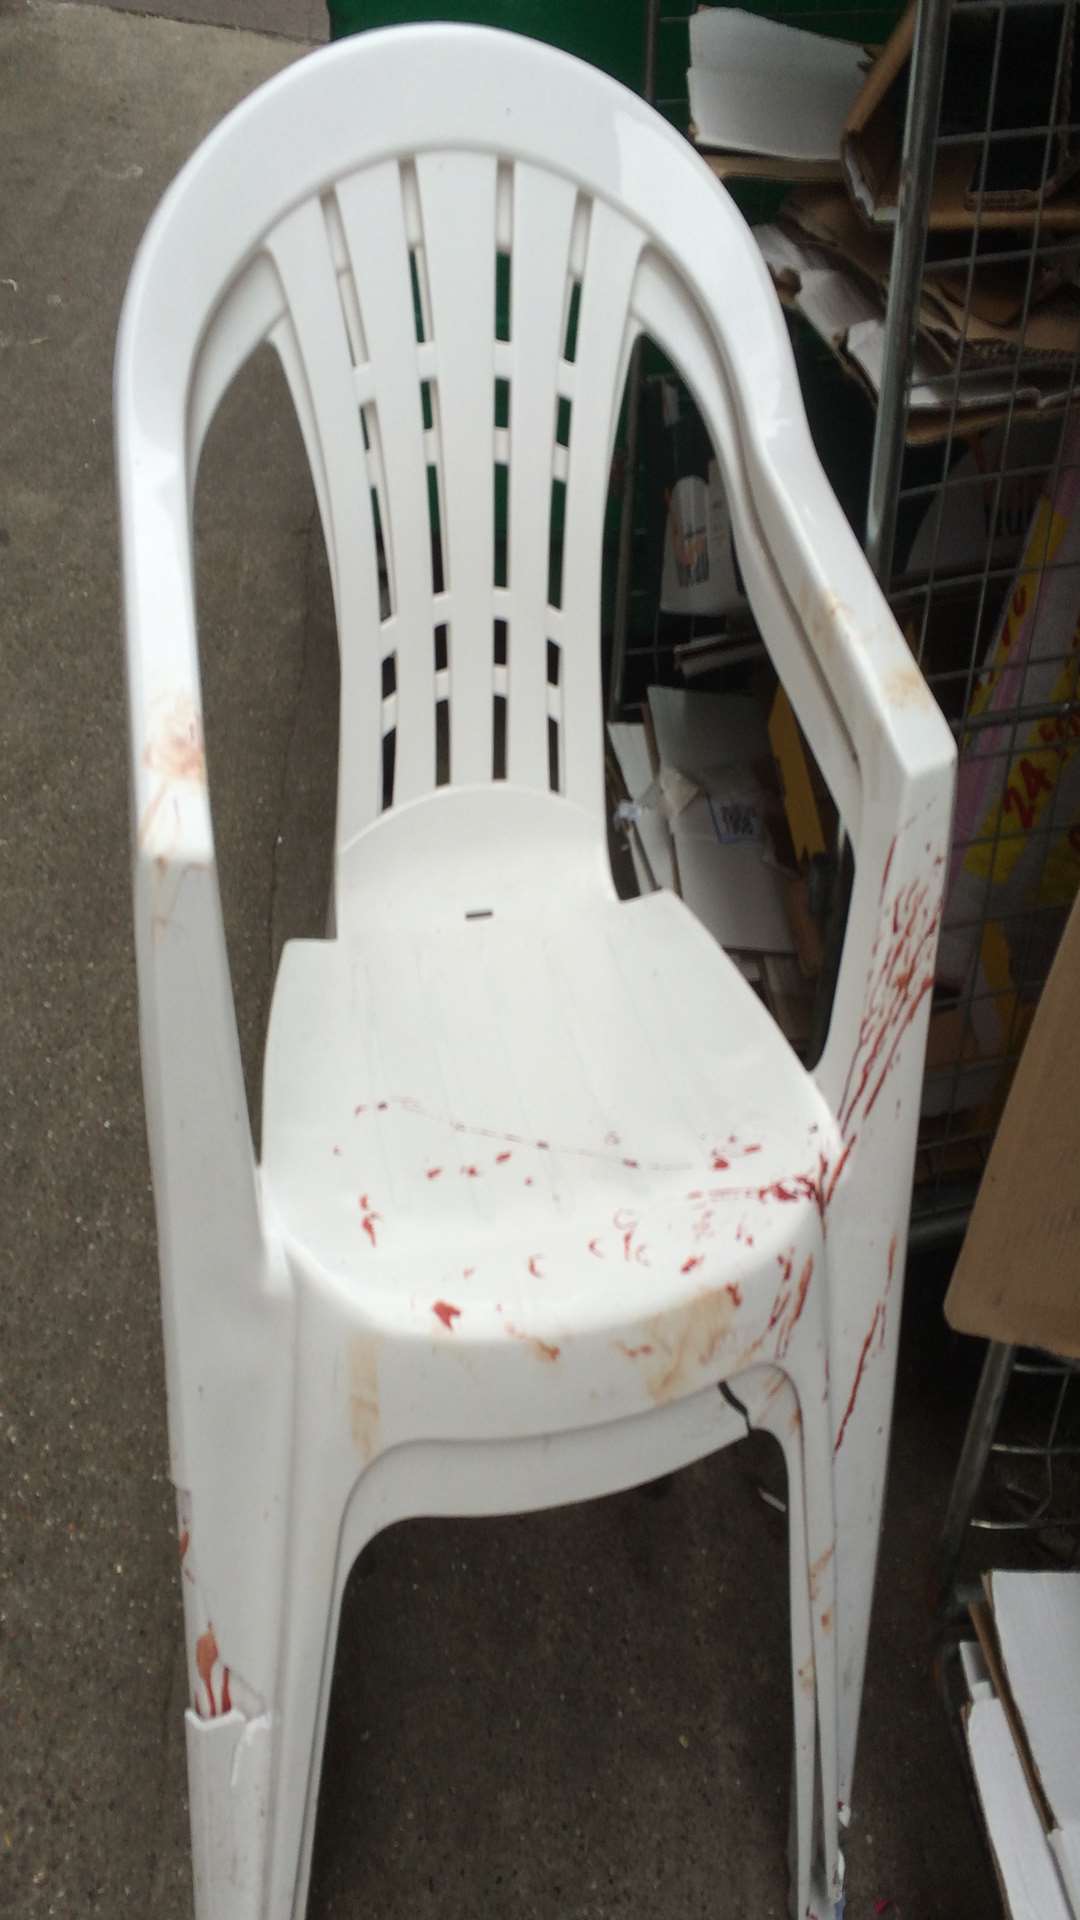 A blood-stained chair where one of the victims of the stabbing sat after the incident